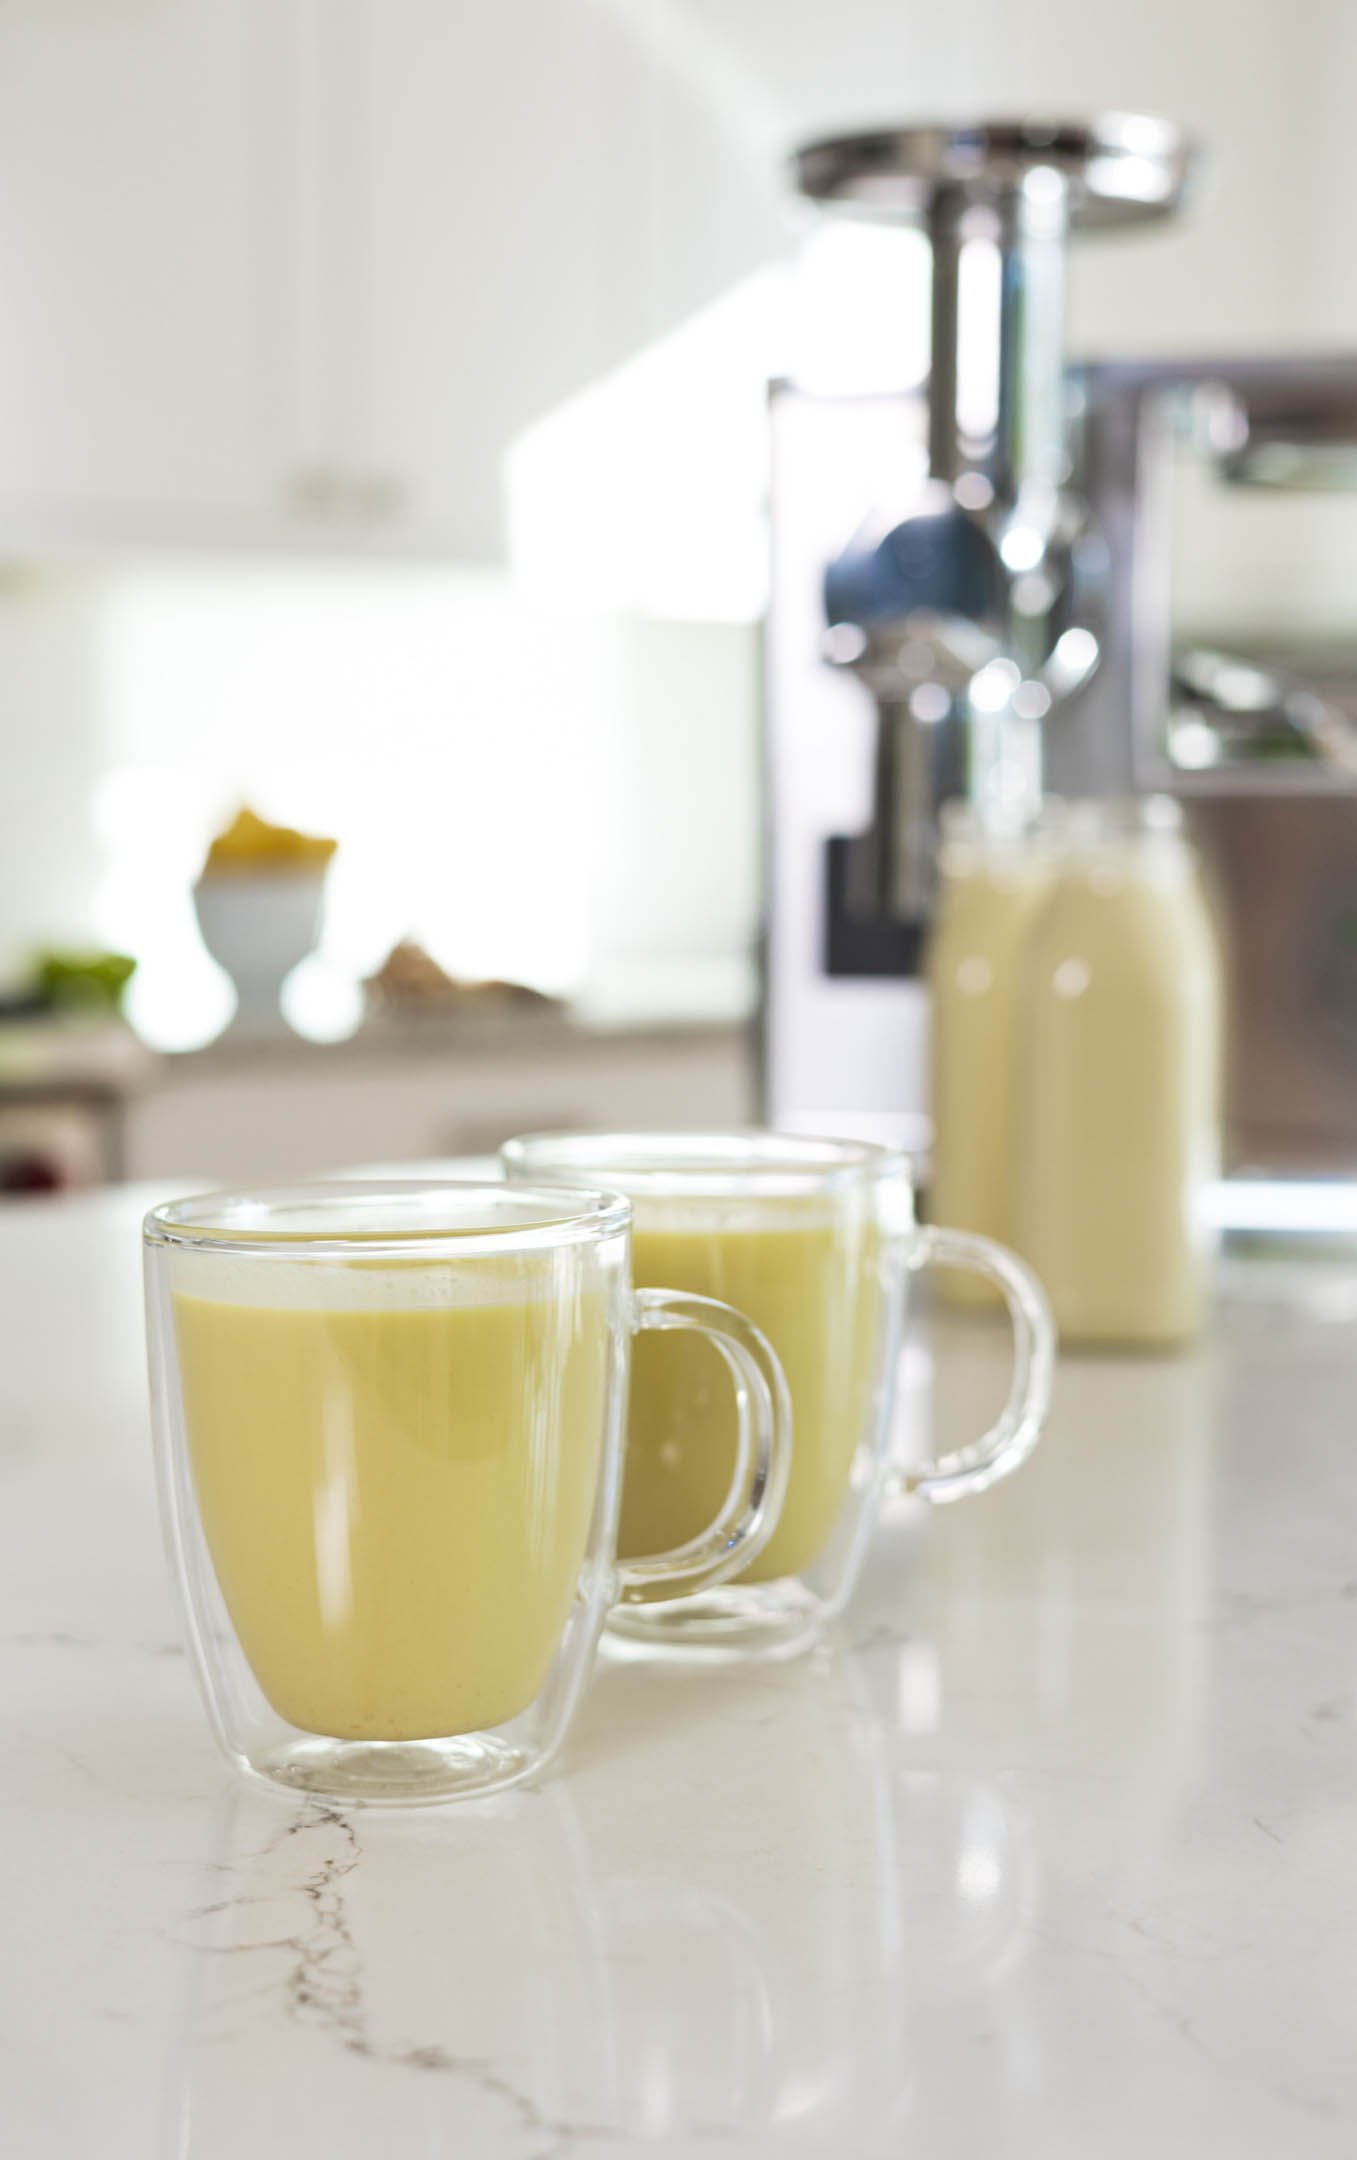 soothing turmeric milk recipe with homemade almond milk and pressed turmeric, ginger, cardamom, and cinnamon juice in cups